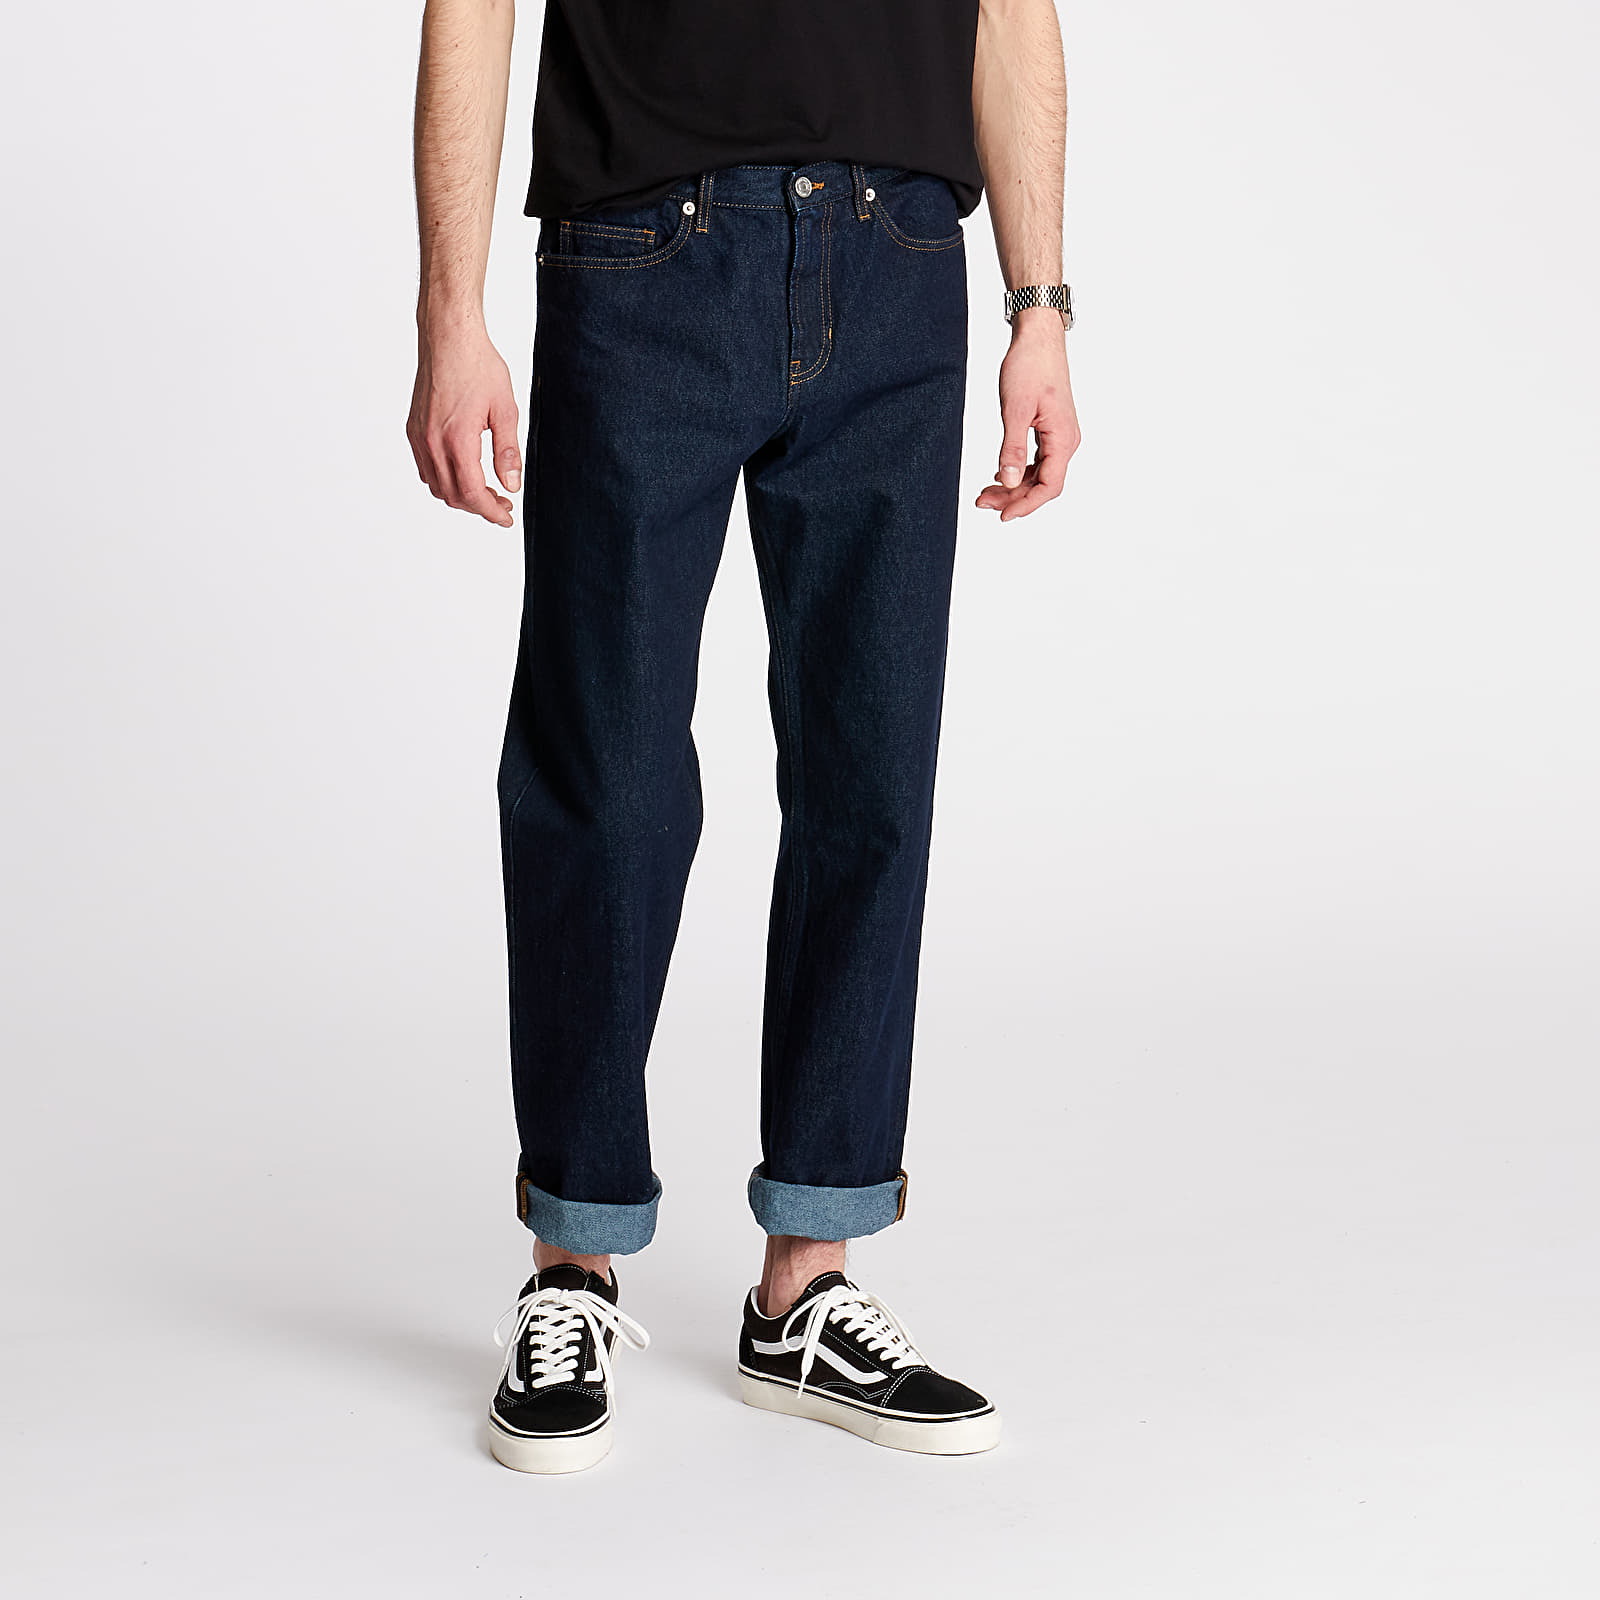 Pants and jeans Norse Projects Regular Denim Indigo